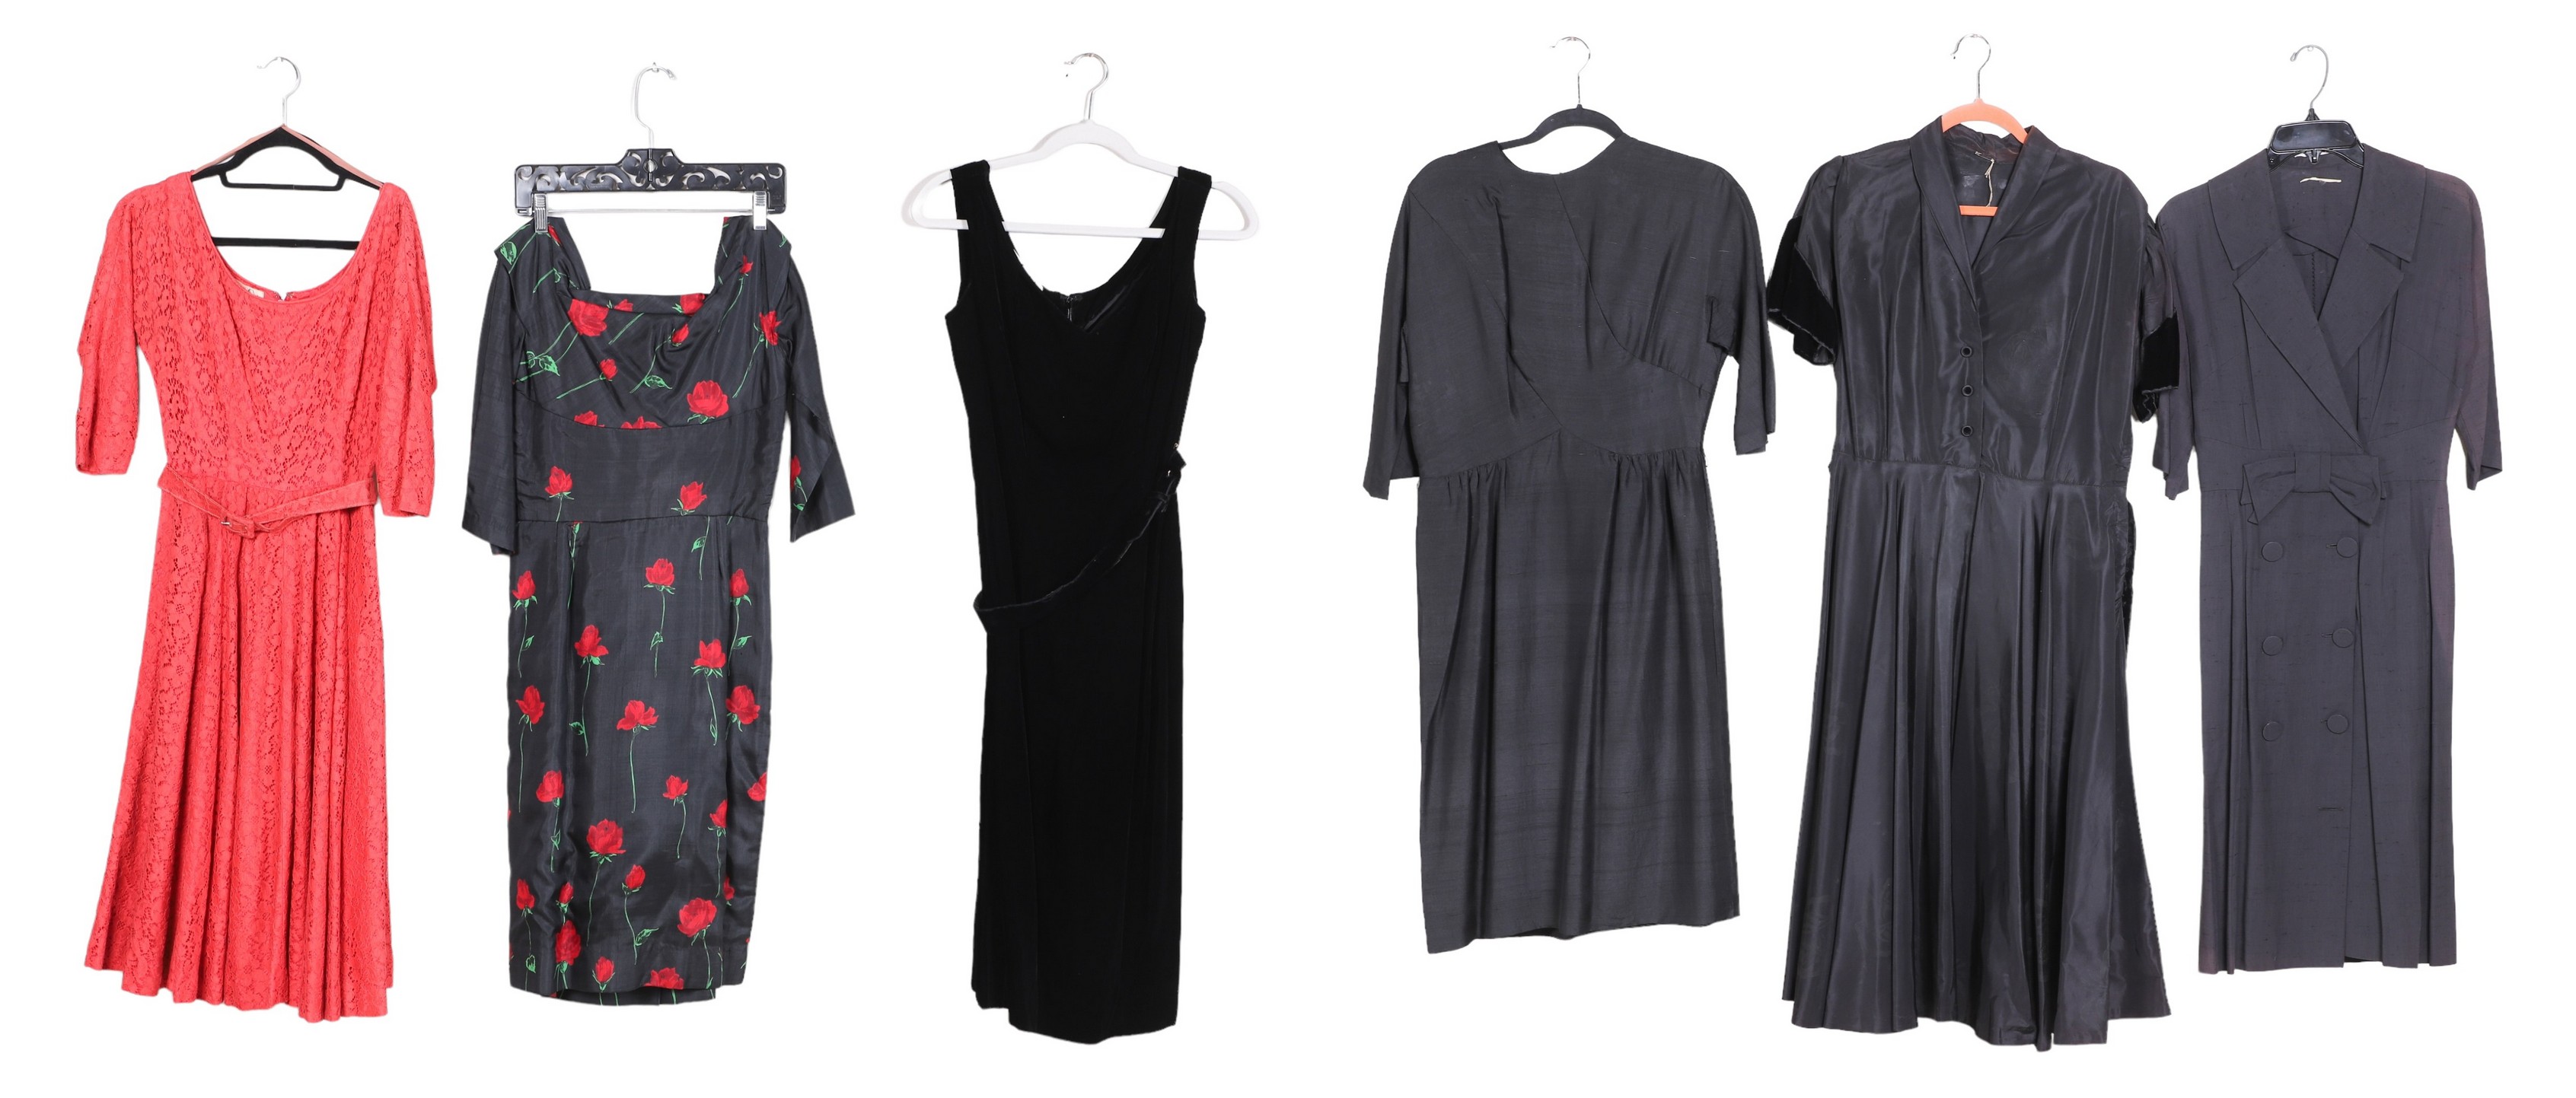  6 1950 s 60 s dresses to include 27a724